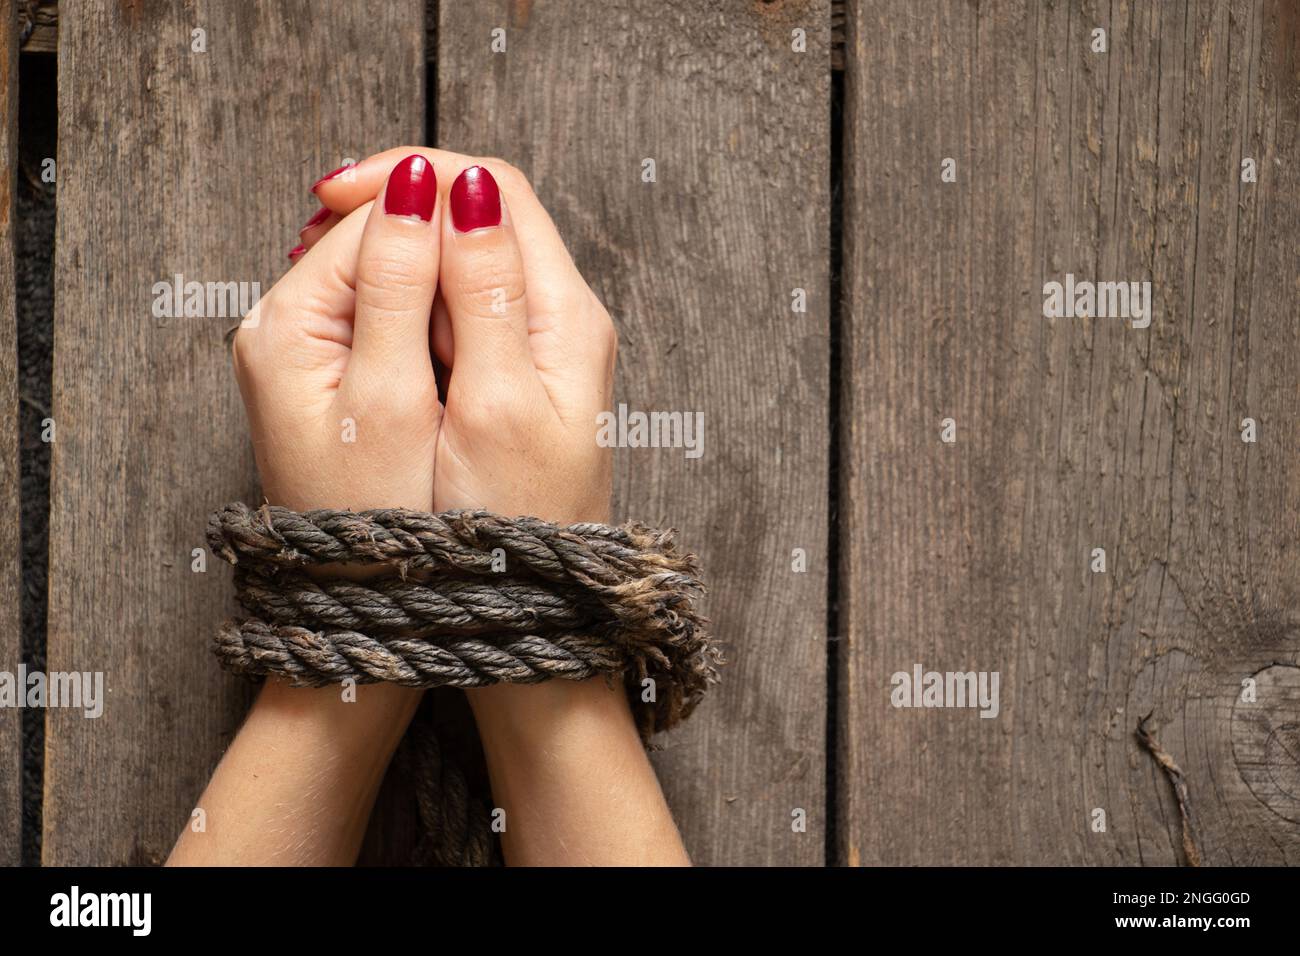 tied female hands with rope on wooden background close up Stock Photo